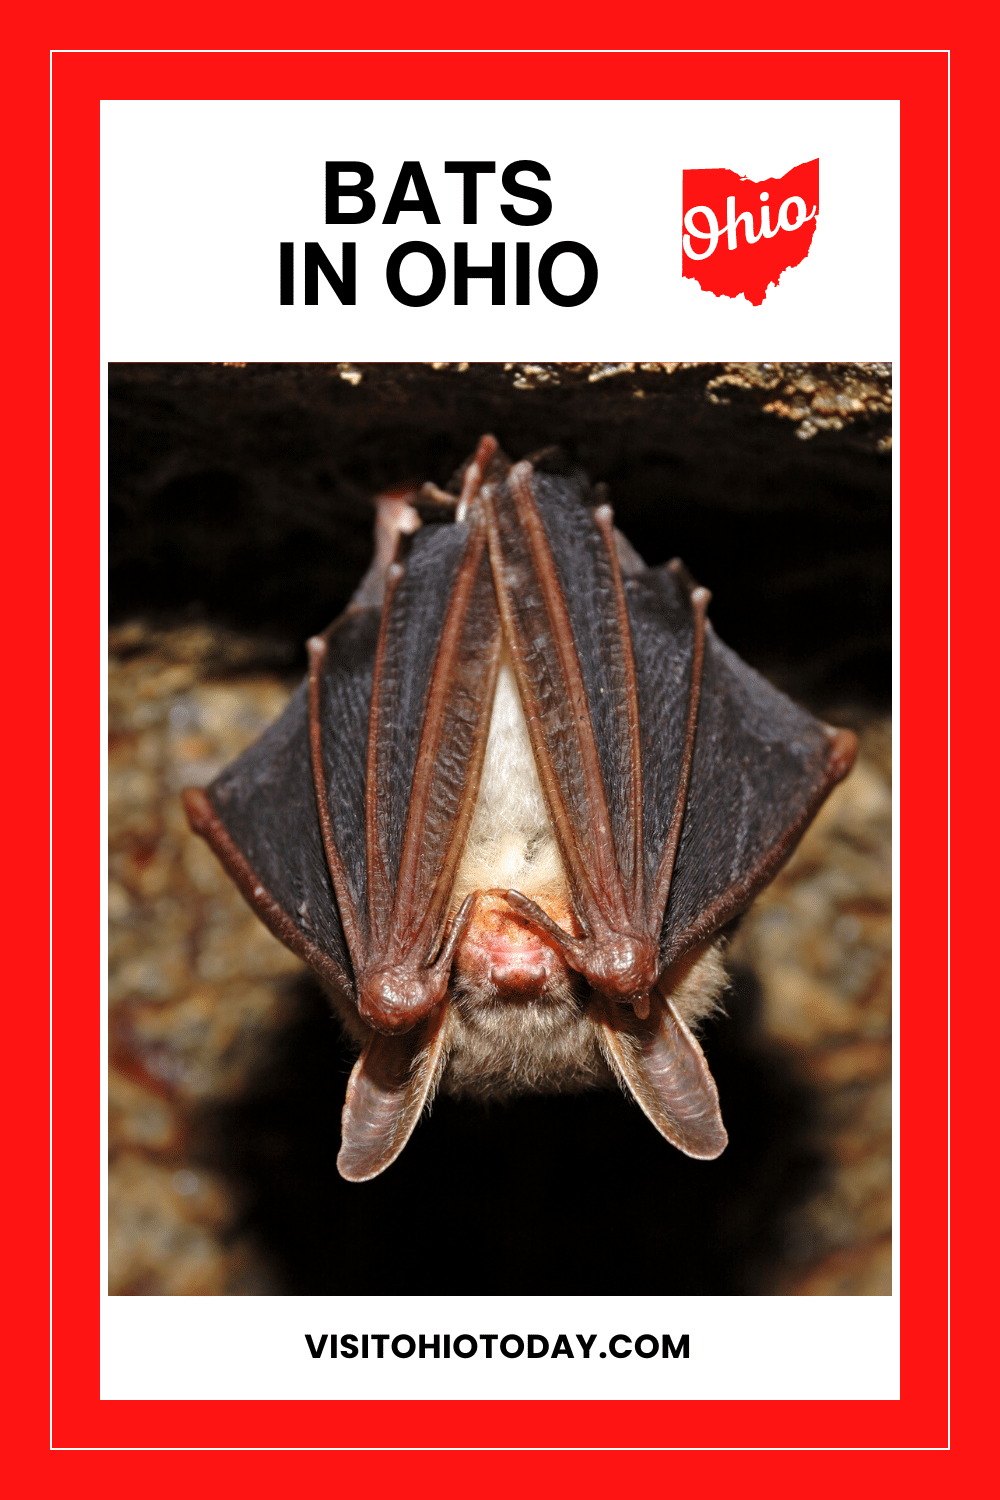 There are 14 species of Bats in Ohio. Find out about these 14 species, their identifying characteristics, habitats, and more.